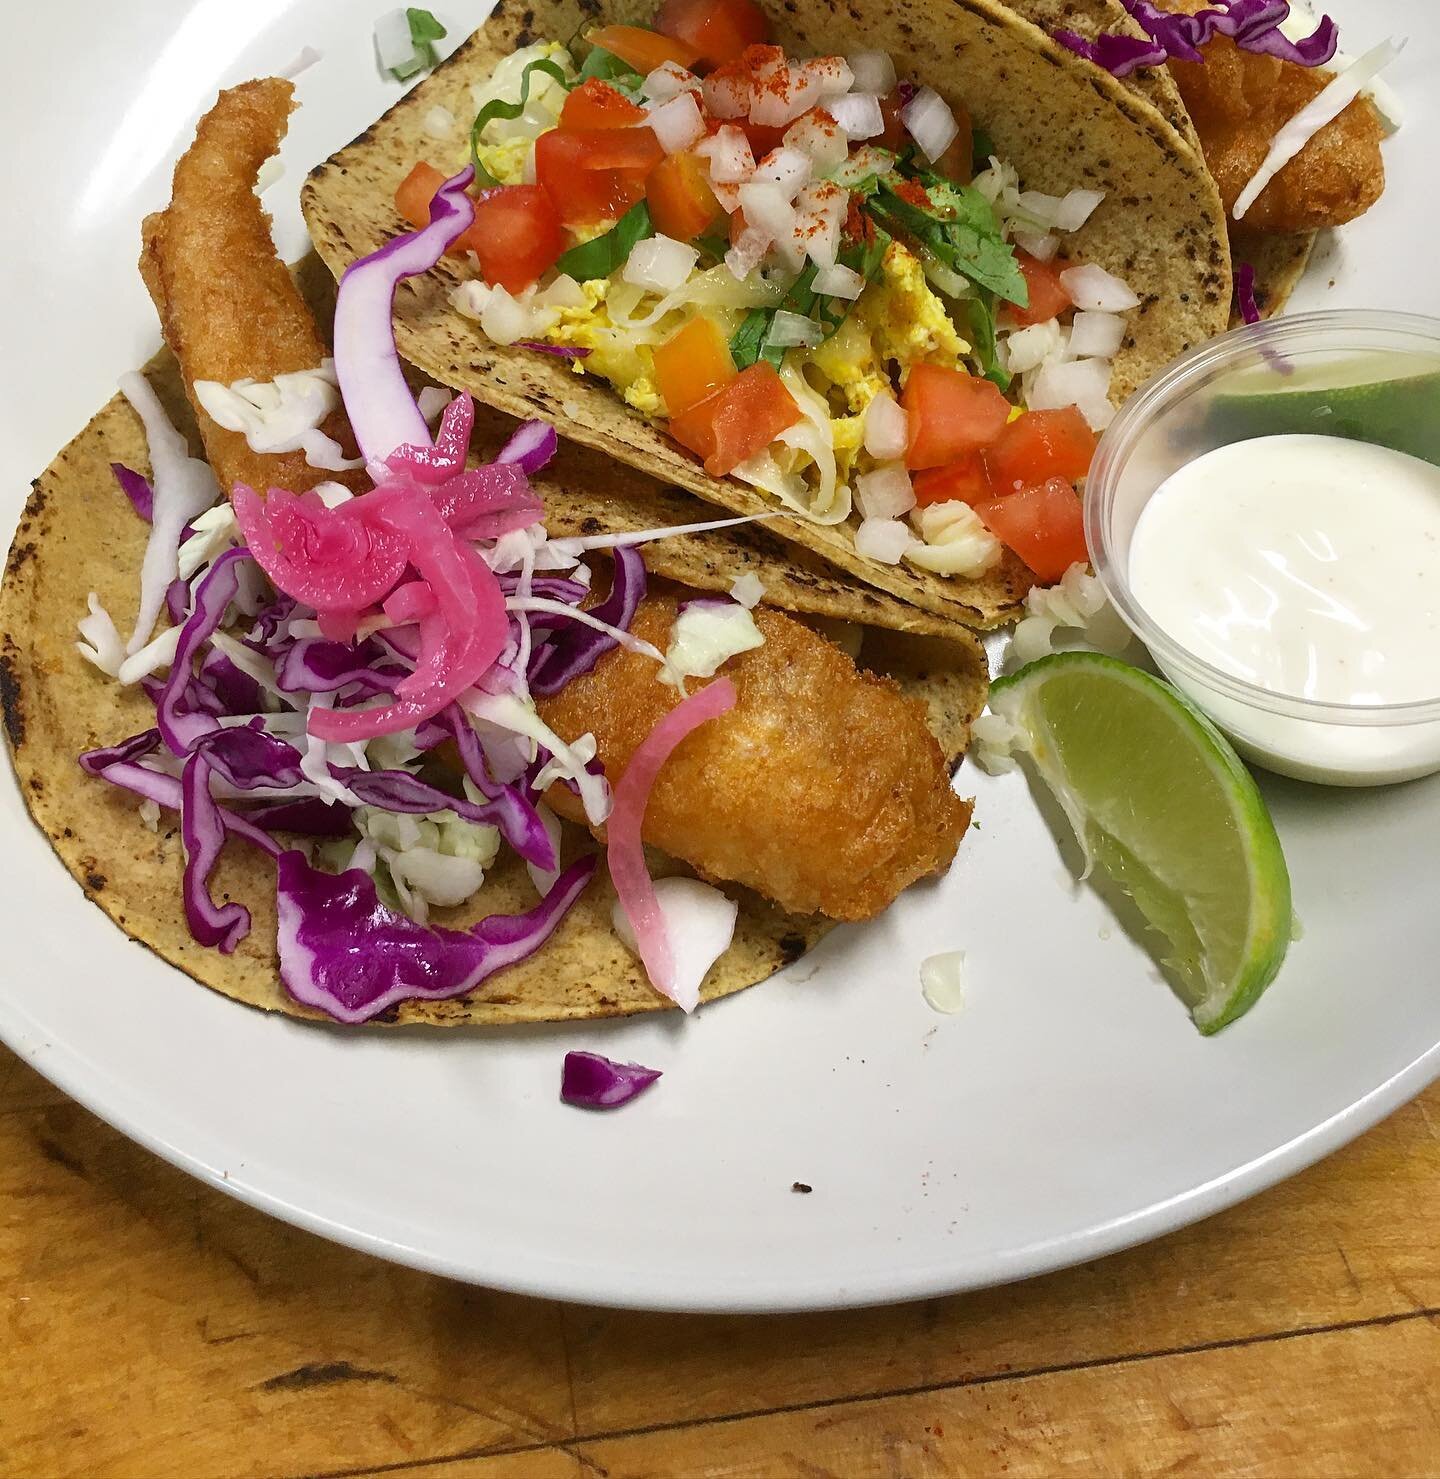 Easiest hack for winning back to school week- take dirty dishes out of the equation! For lunch and dinner all day today we offer $1 off every taco- so you have an easy way to feed the whole family without breaking the bank, while still providing food